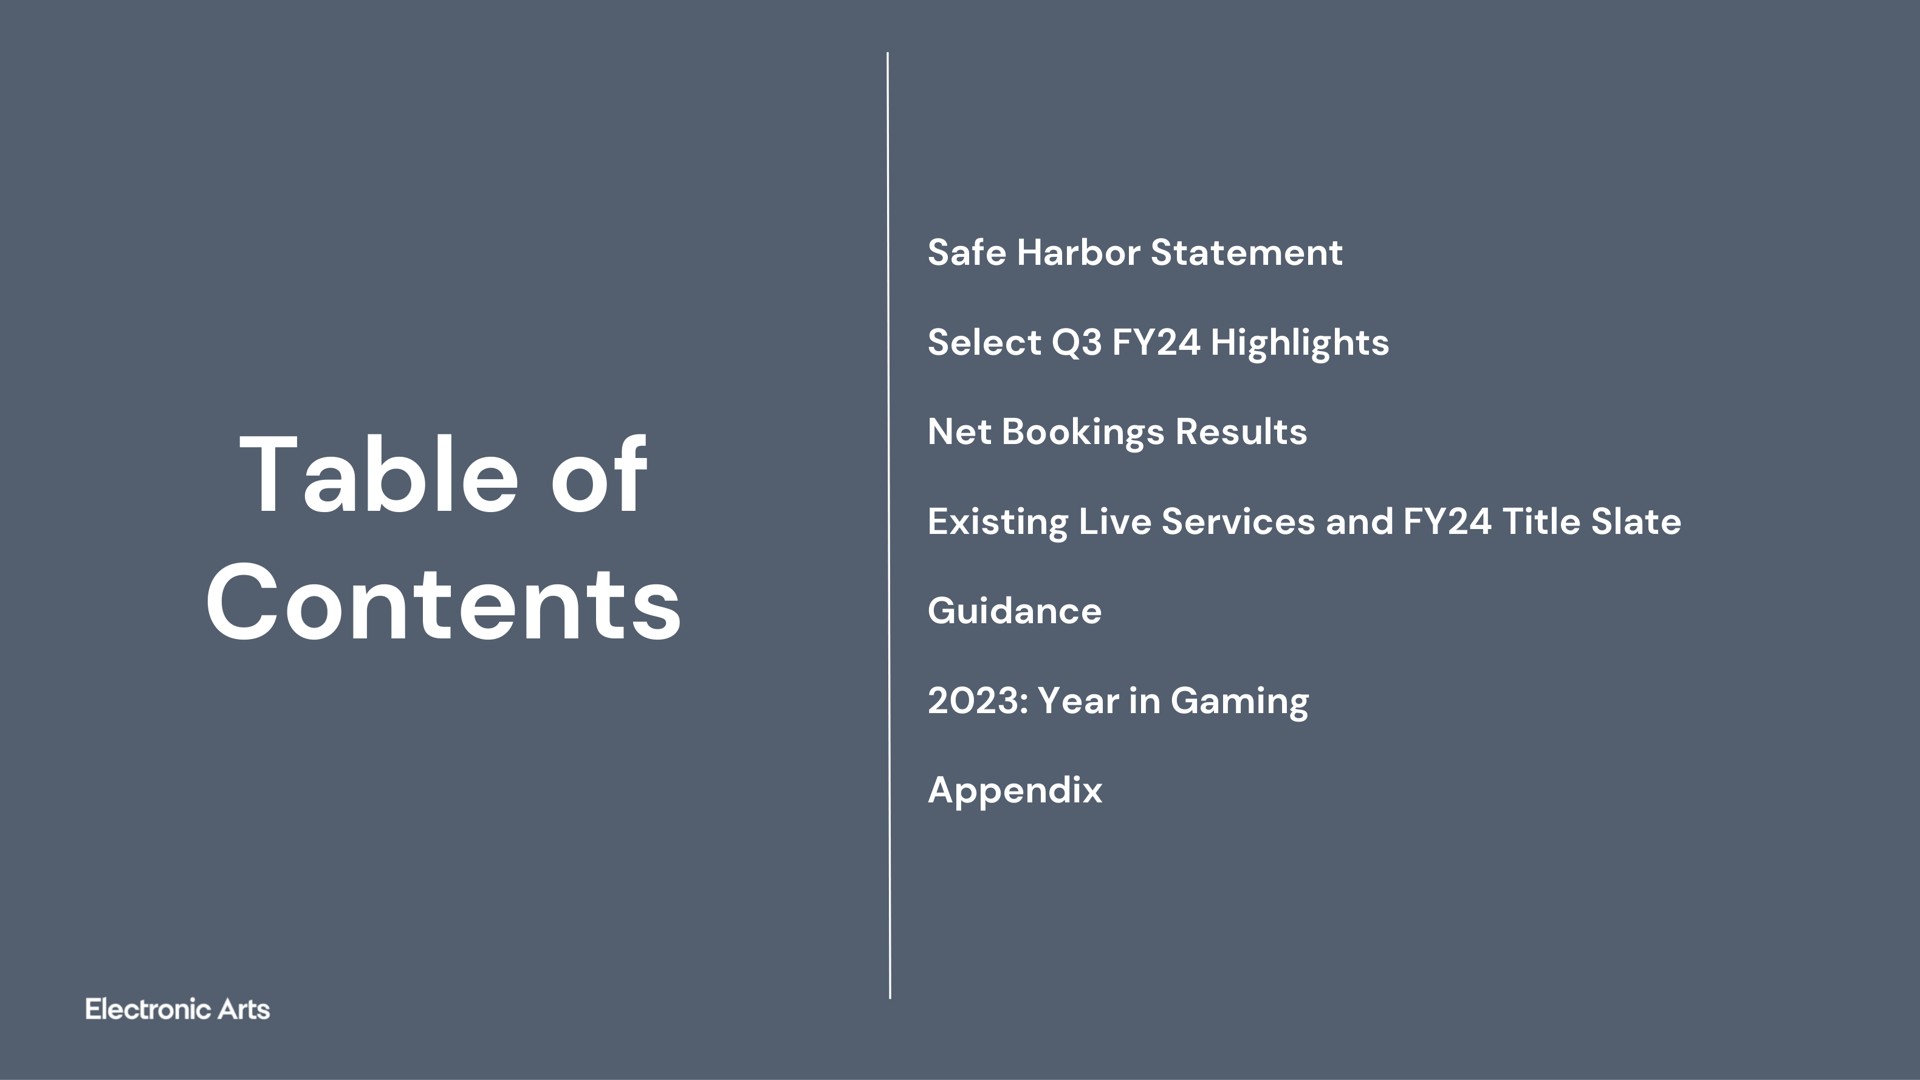 table of contents safe harbor statement select highlights net bookings results existing live services and title slate guidance year in gaming appendix | Electronic Arts